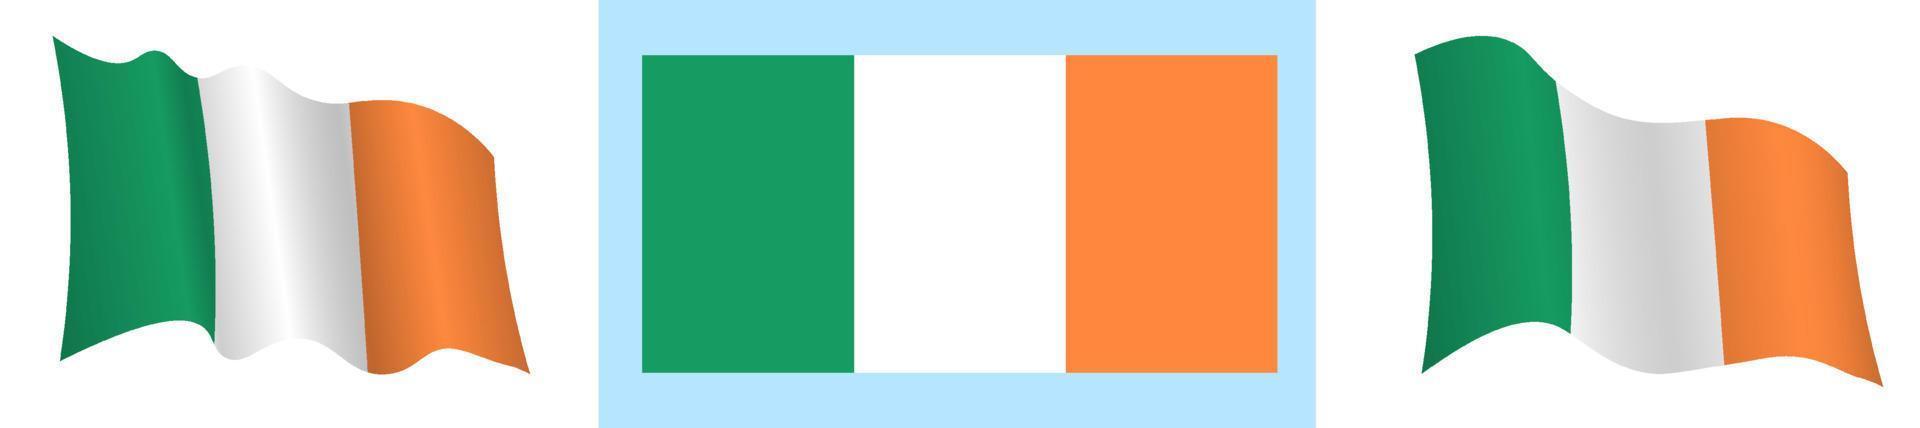 flag of ireland in static position and in motion, developing in wind in exact colors and sizes, on white background vector